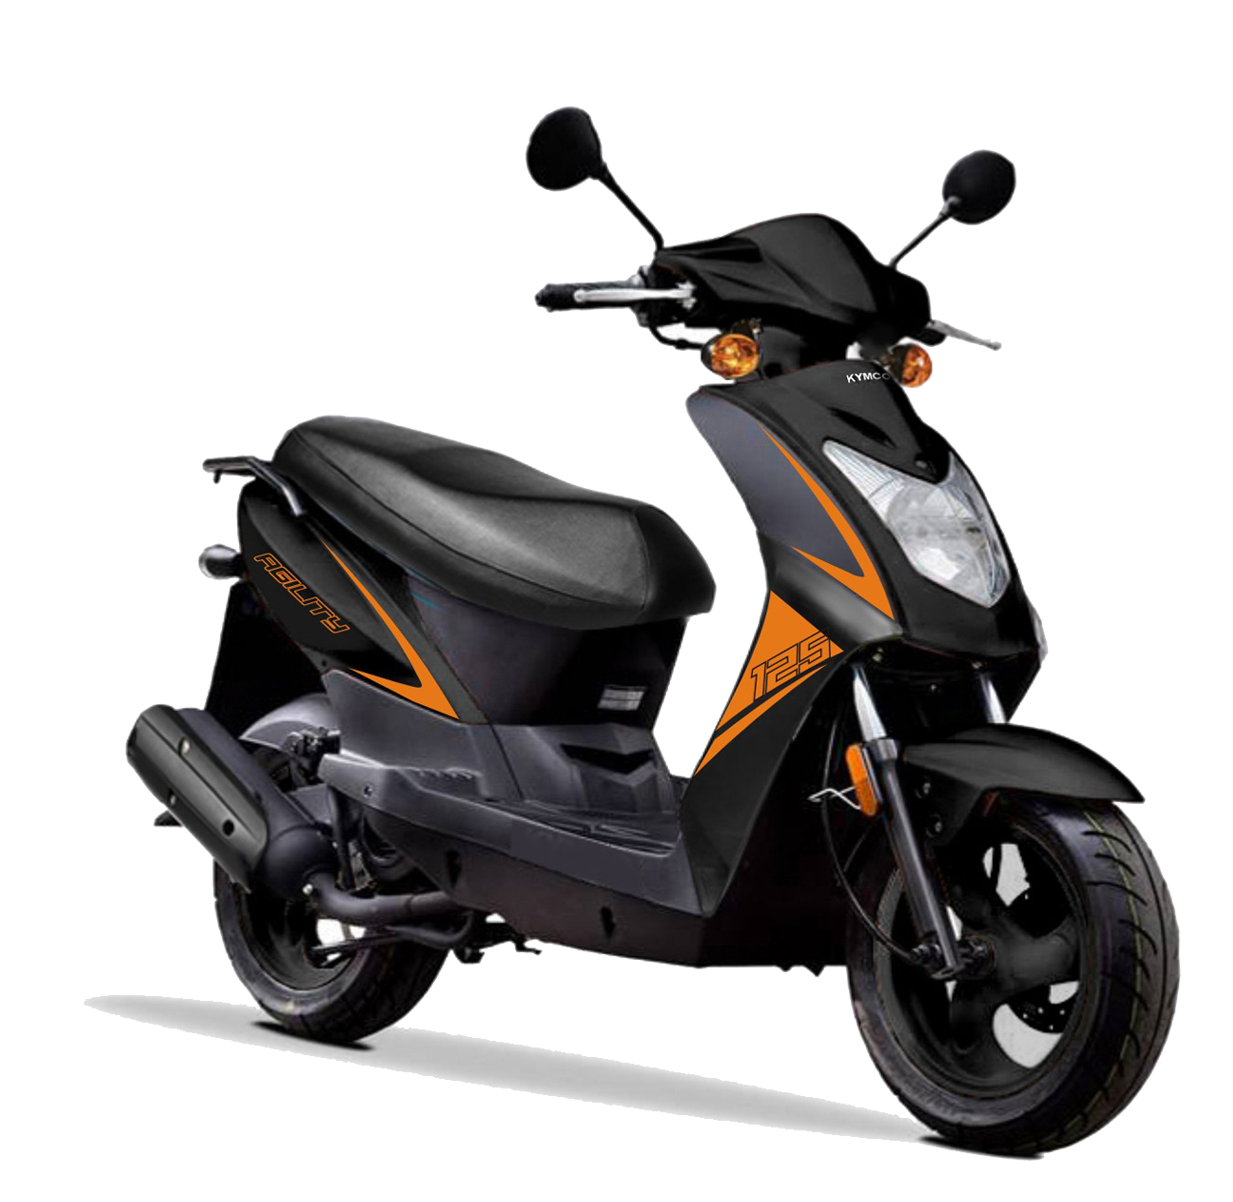 Kymco Agility 125 Scooter Review